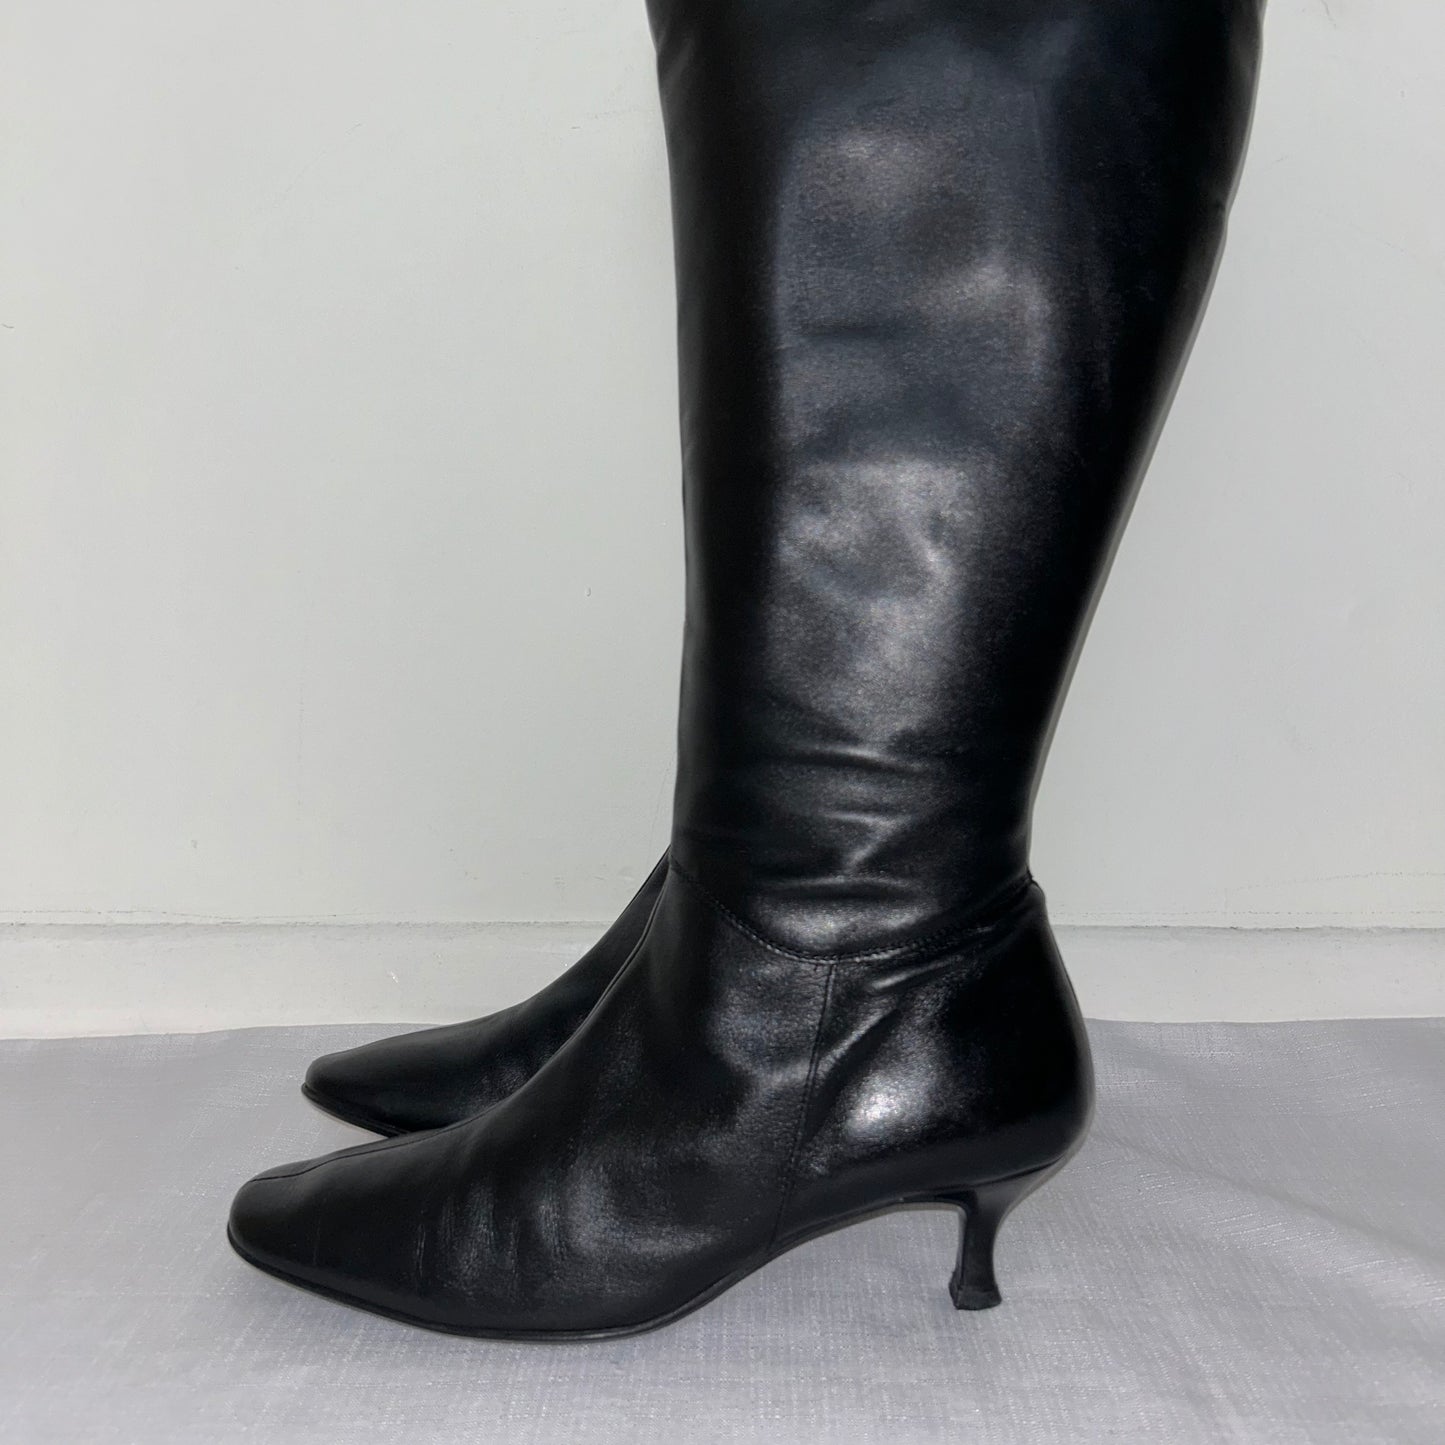 toes of black knee high boots shown on a white background